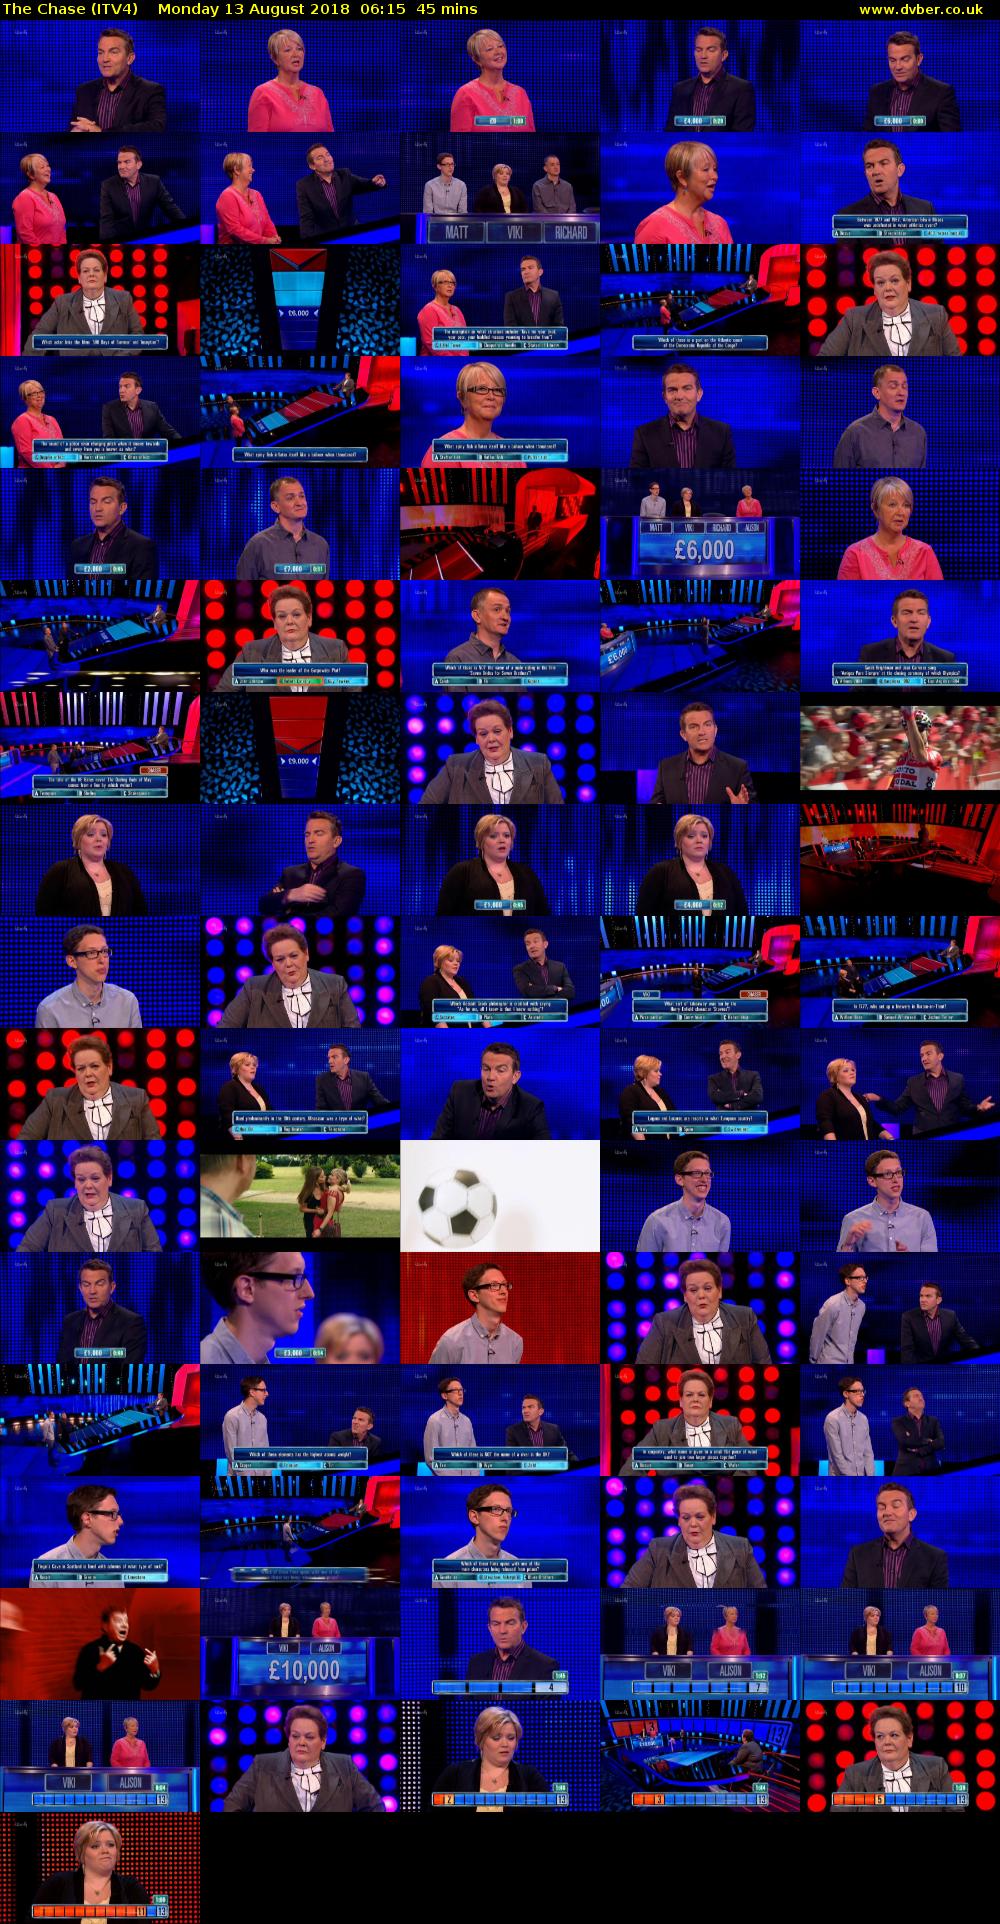 The Chase (ITV4) Monday 13 August 2018 06:15 - 07:00